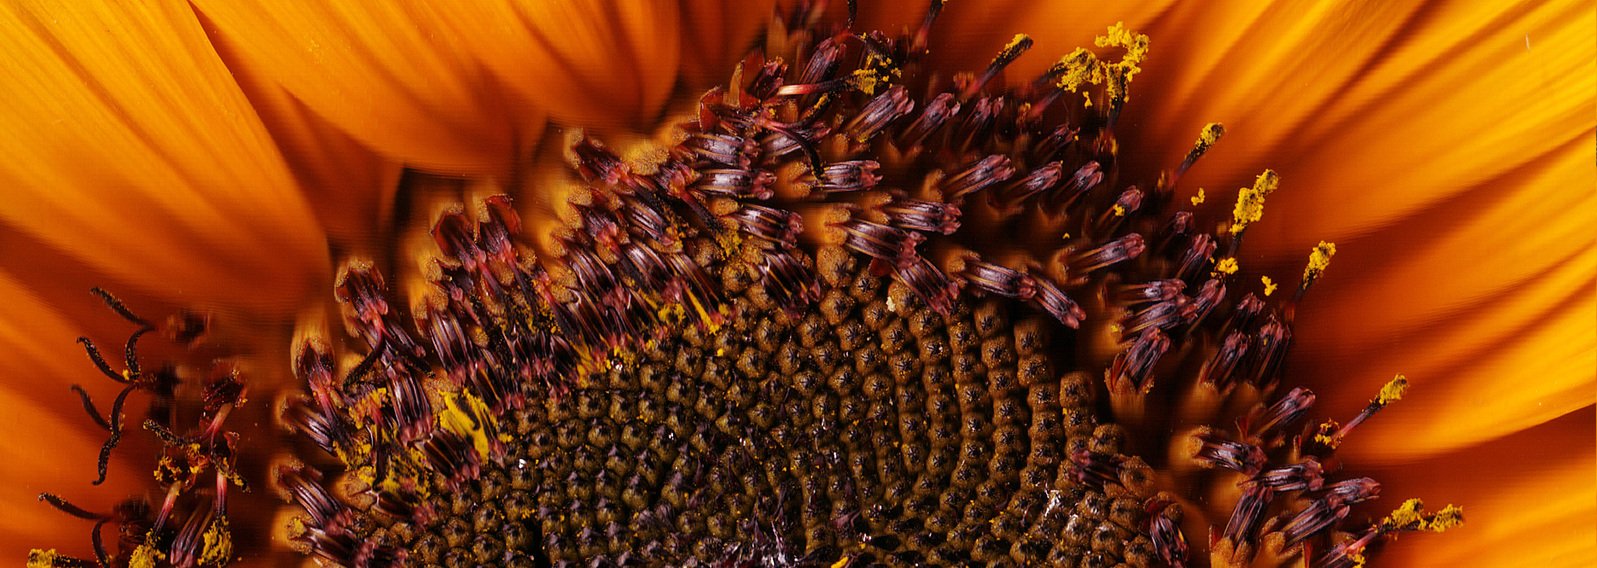 an orange sunflower with some bees in it